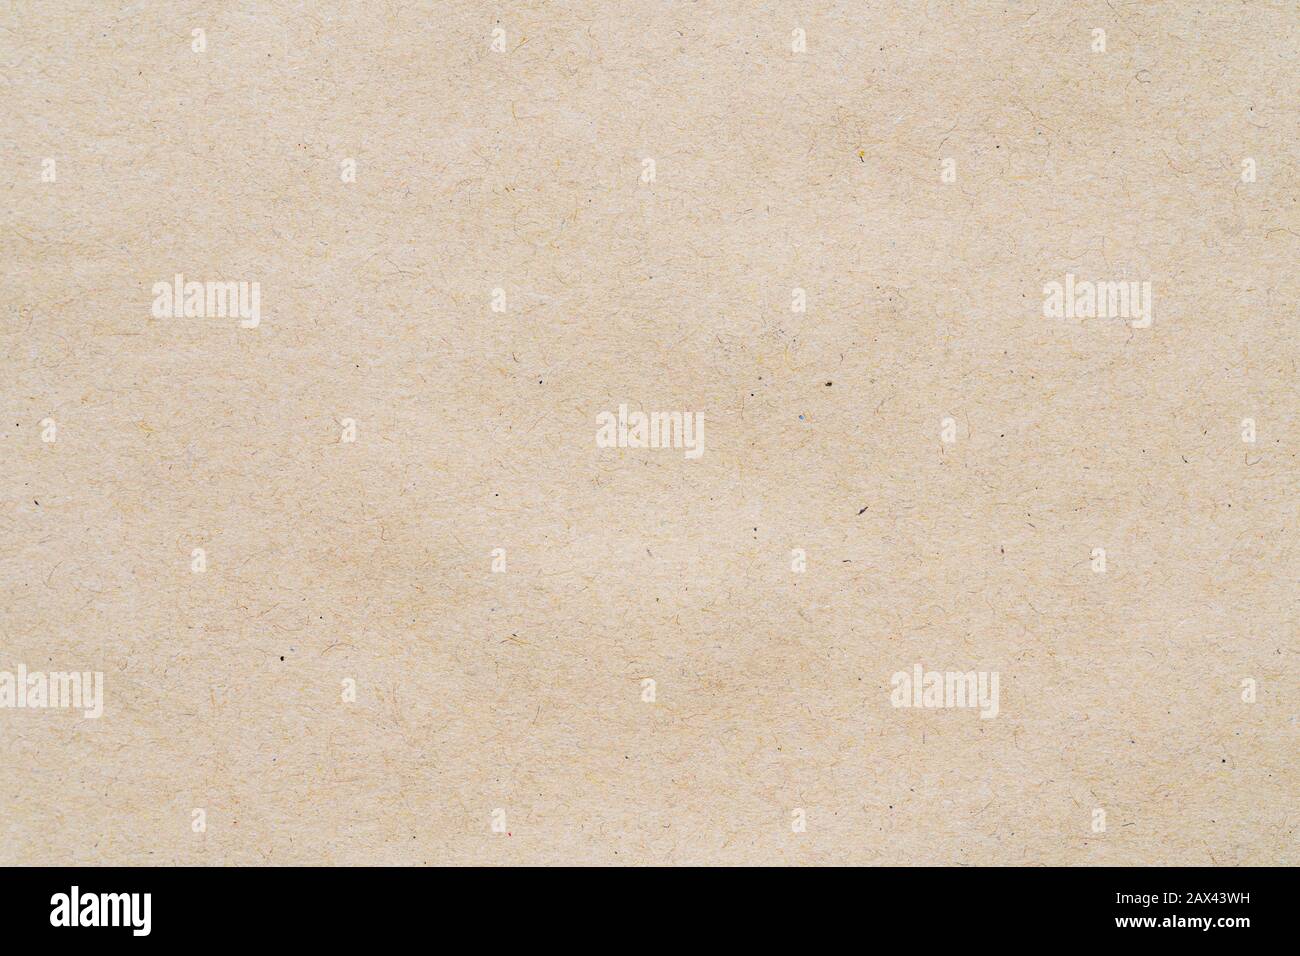 Light yellow pattern from sheet of recycled carton. Close-up detail photomicrography view of abstract texture recycled eco-friendly cardboard material Stock Photo